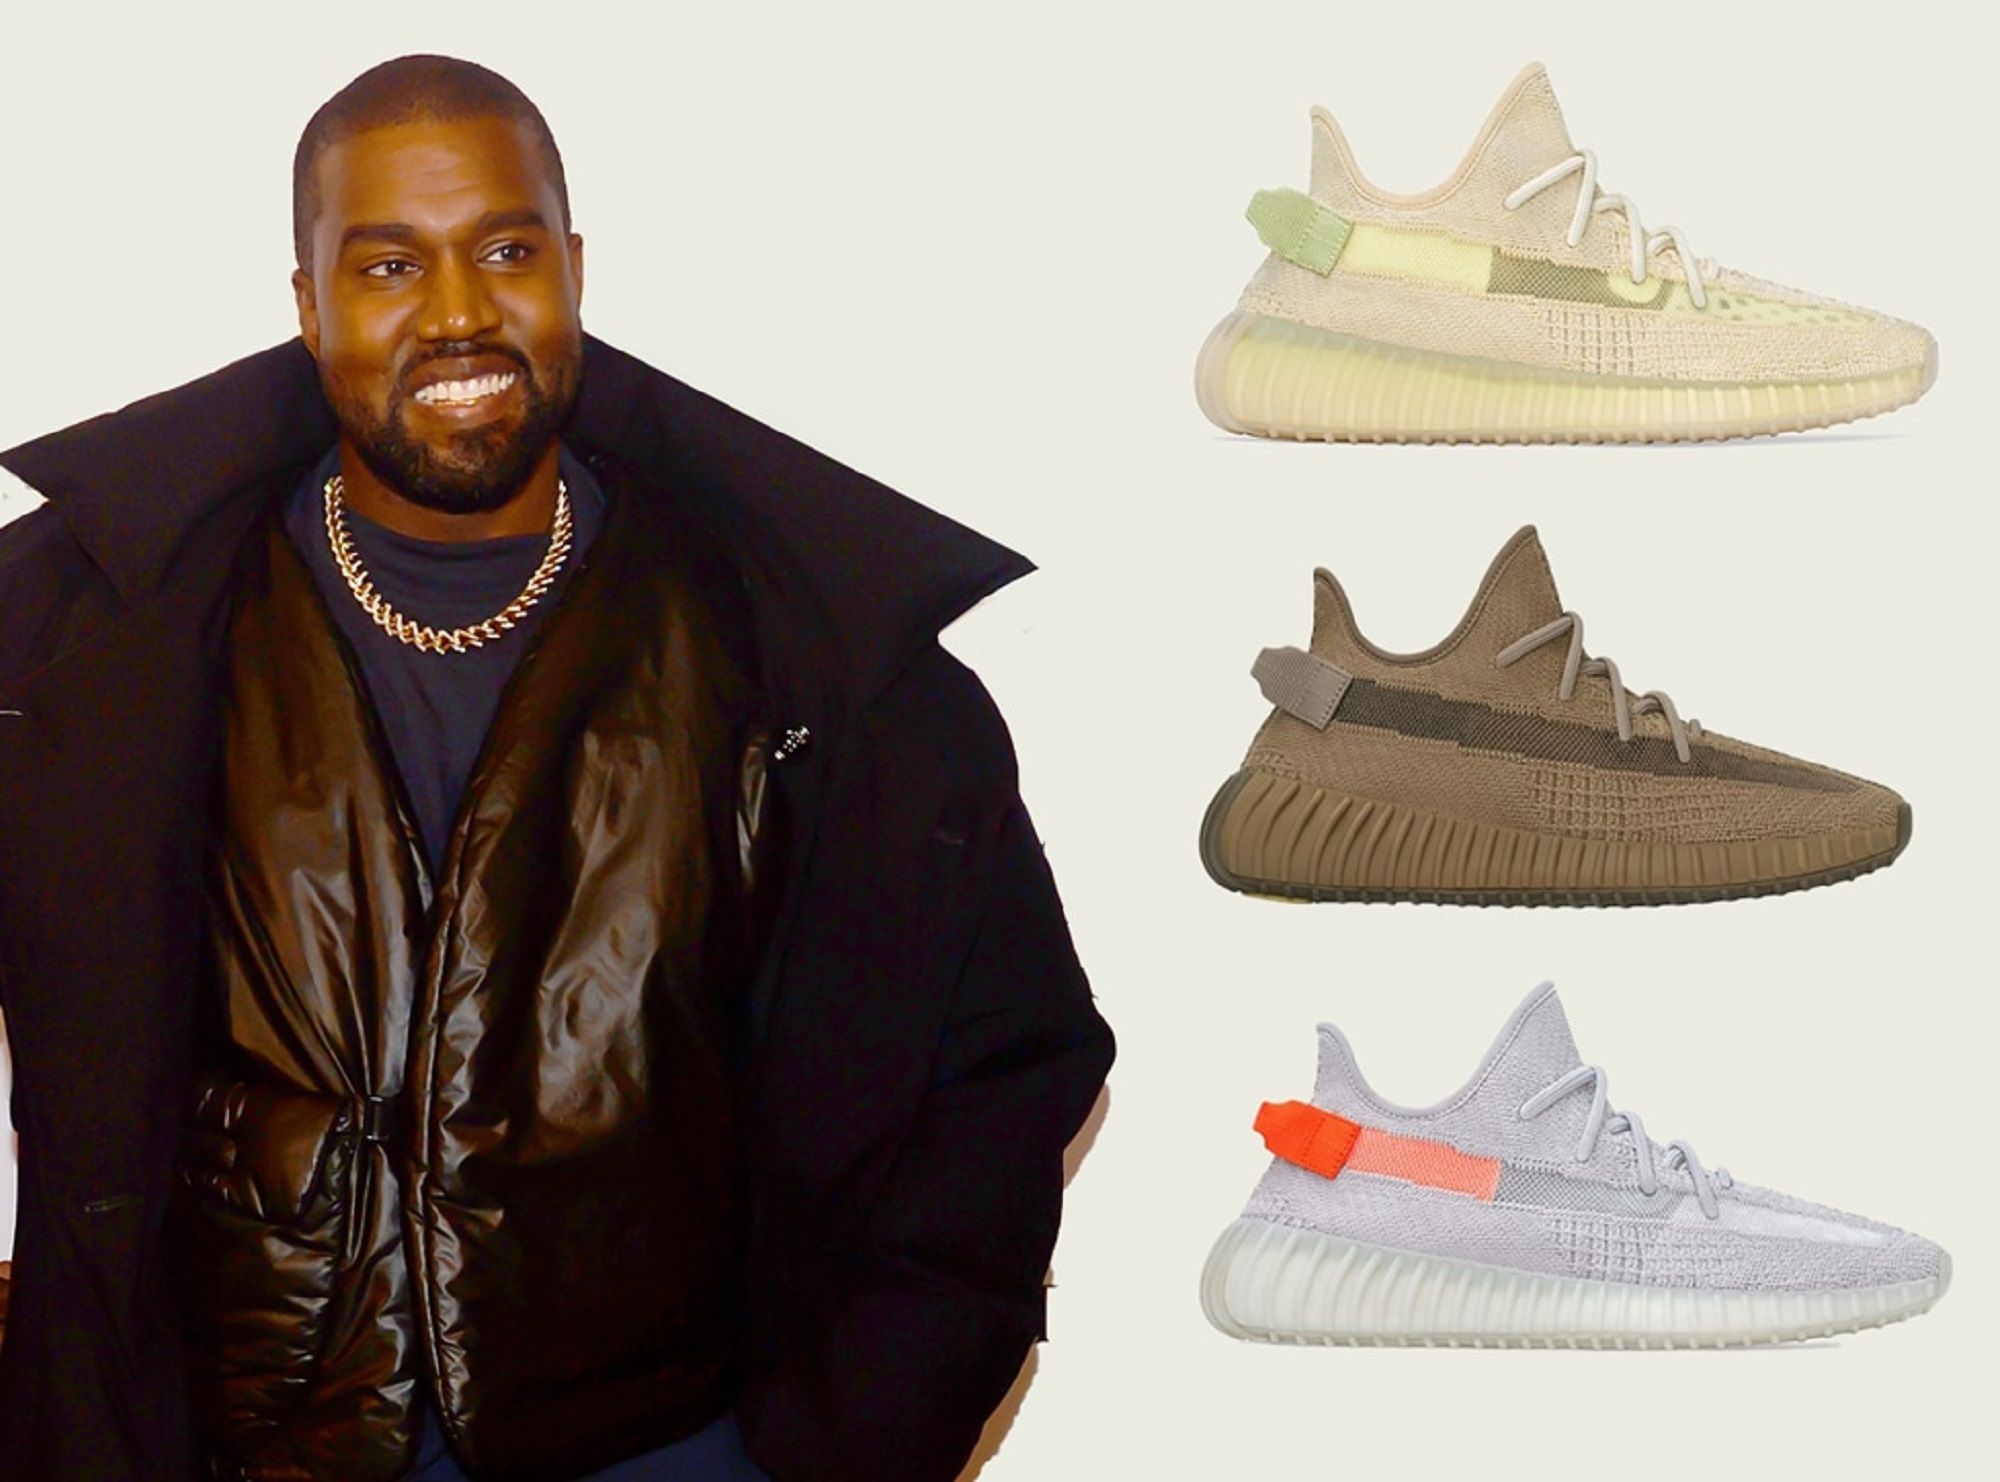 Get Ready to Turn Heads with Adidas x Kanye West Clothing